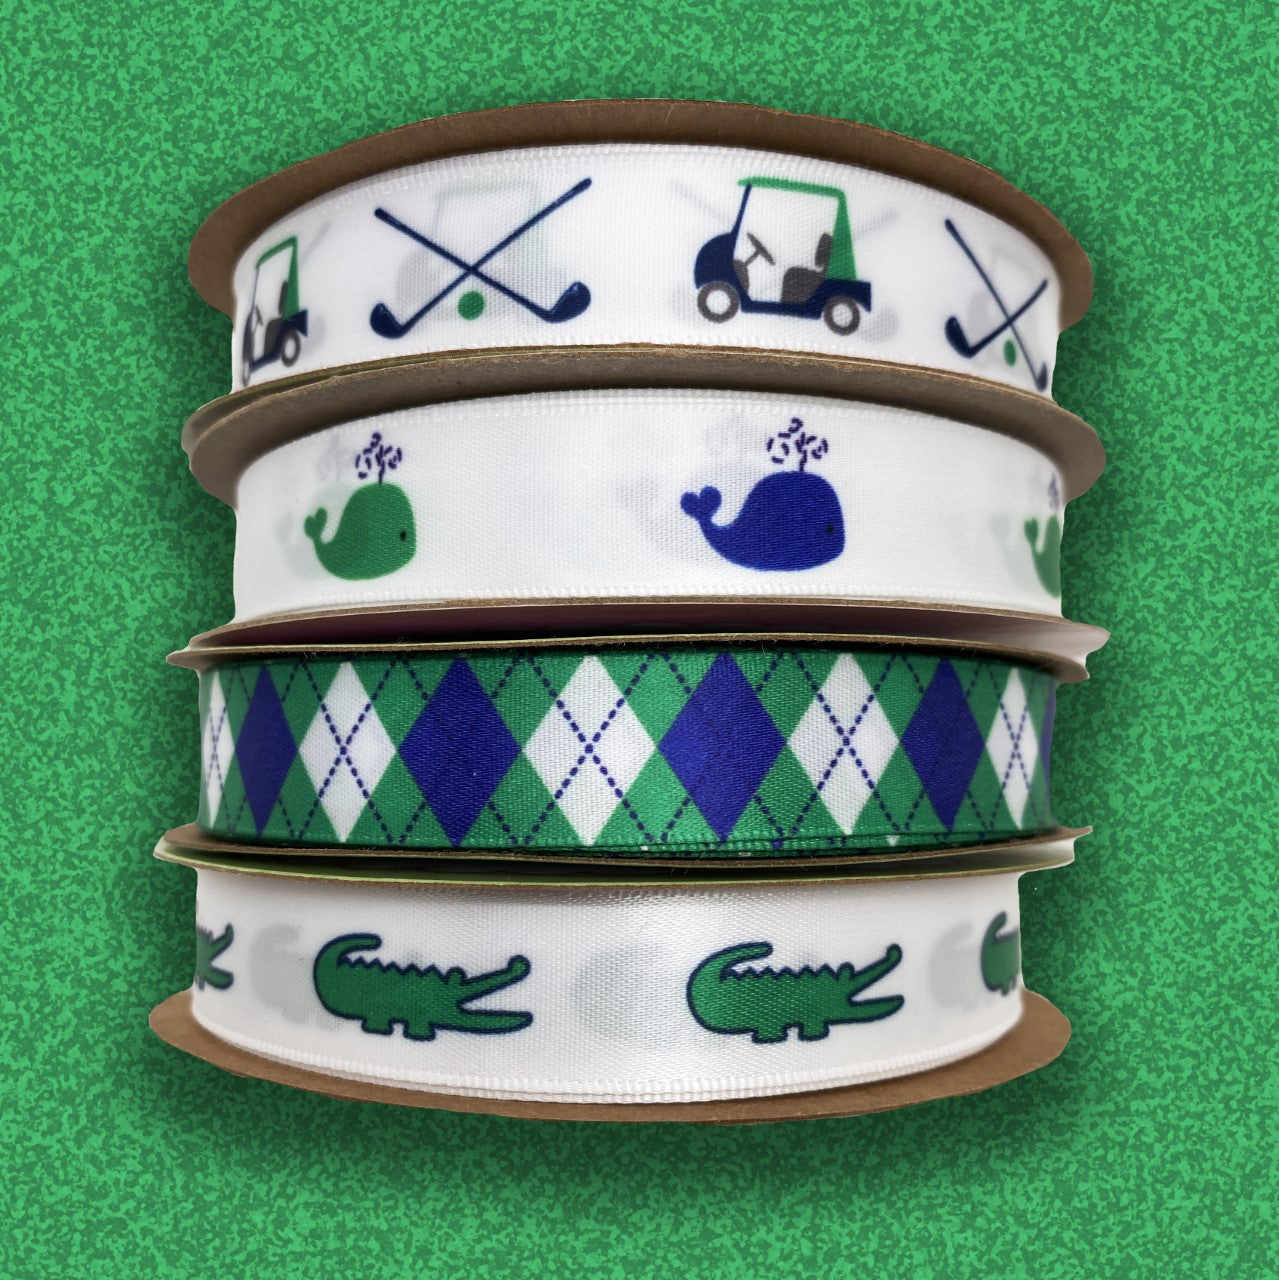 Pair our preppy alligators with our suite of blue and green options for golf and beach themes! All our ribbon is designed and printed in the USA